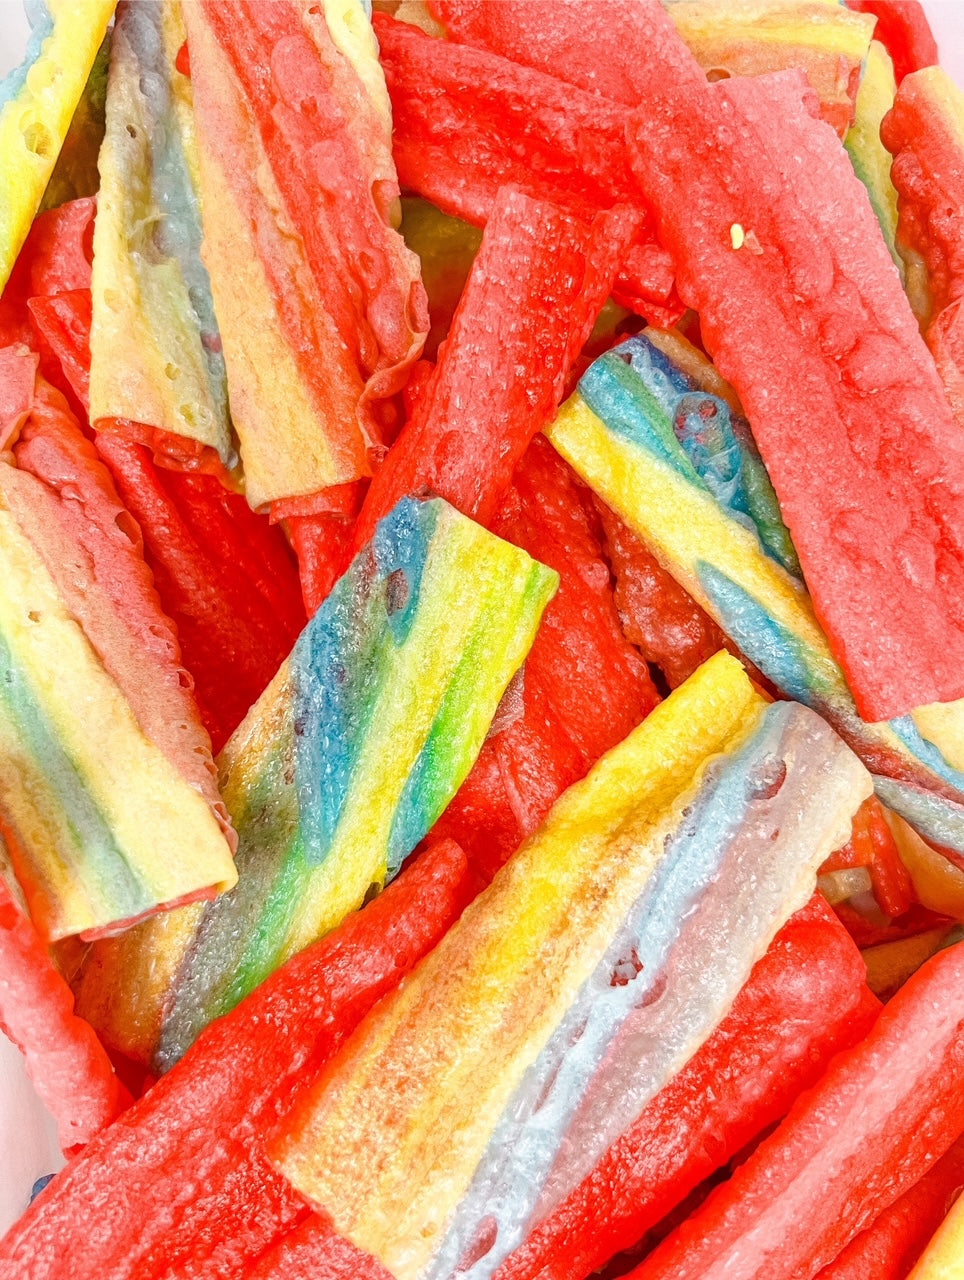 Freeze dried rollup candy